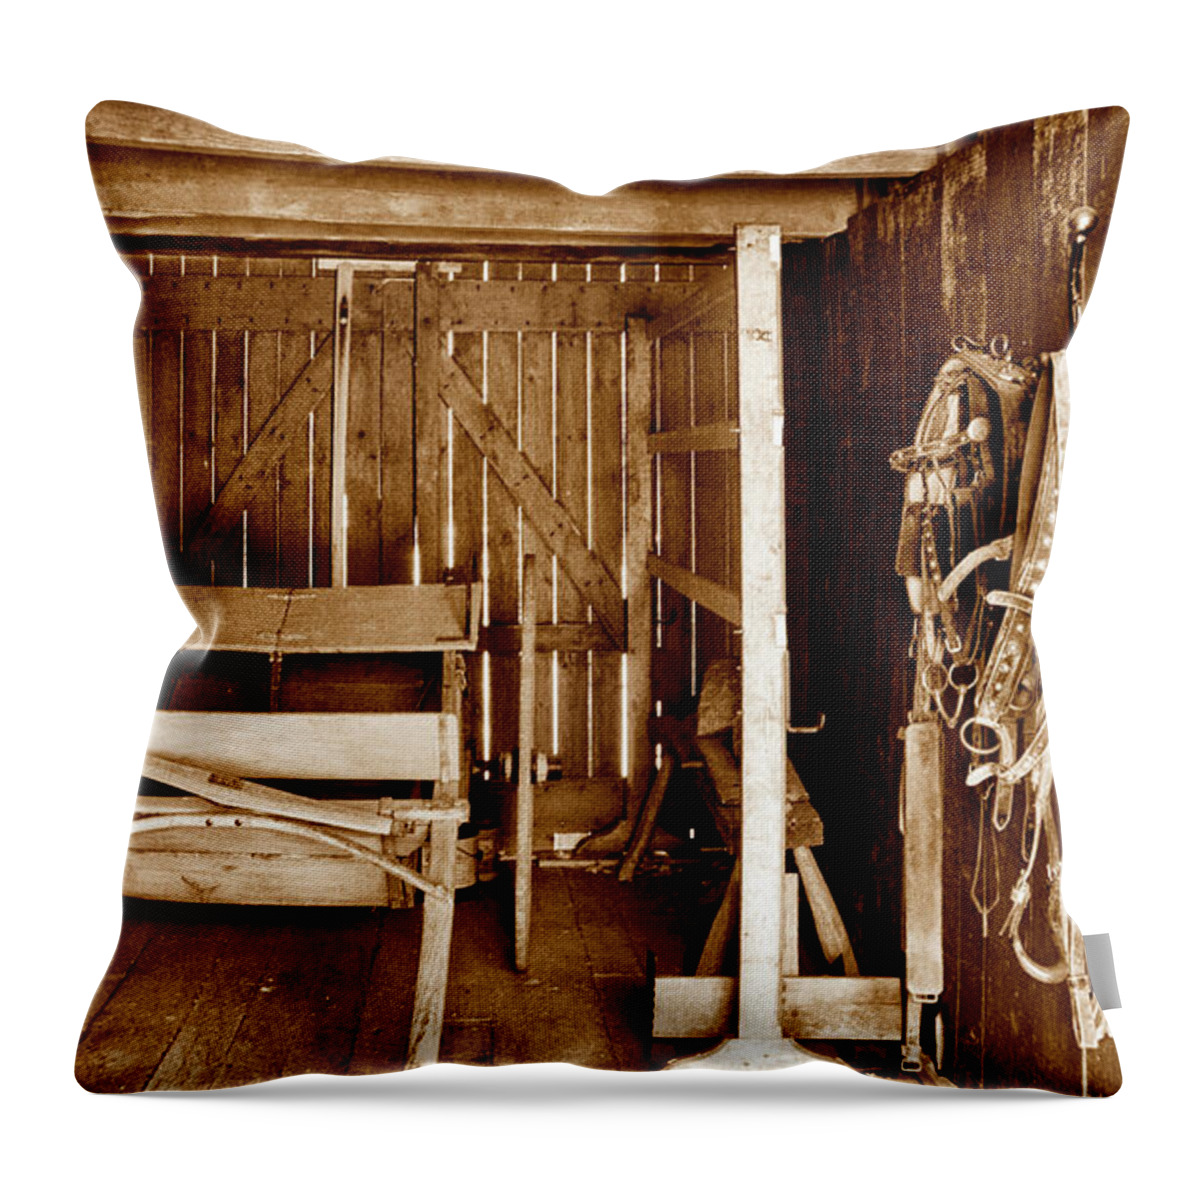 Infrared Throw Pillow featuring the photograph Wagon Stall by Paul W Faust - Impressions of Light